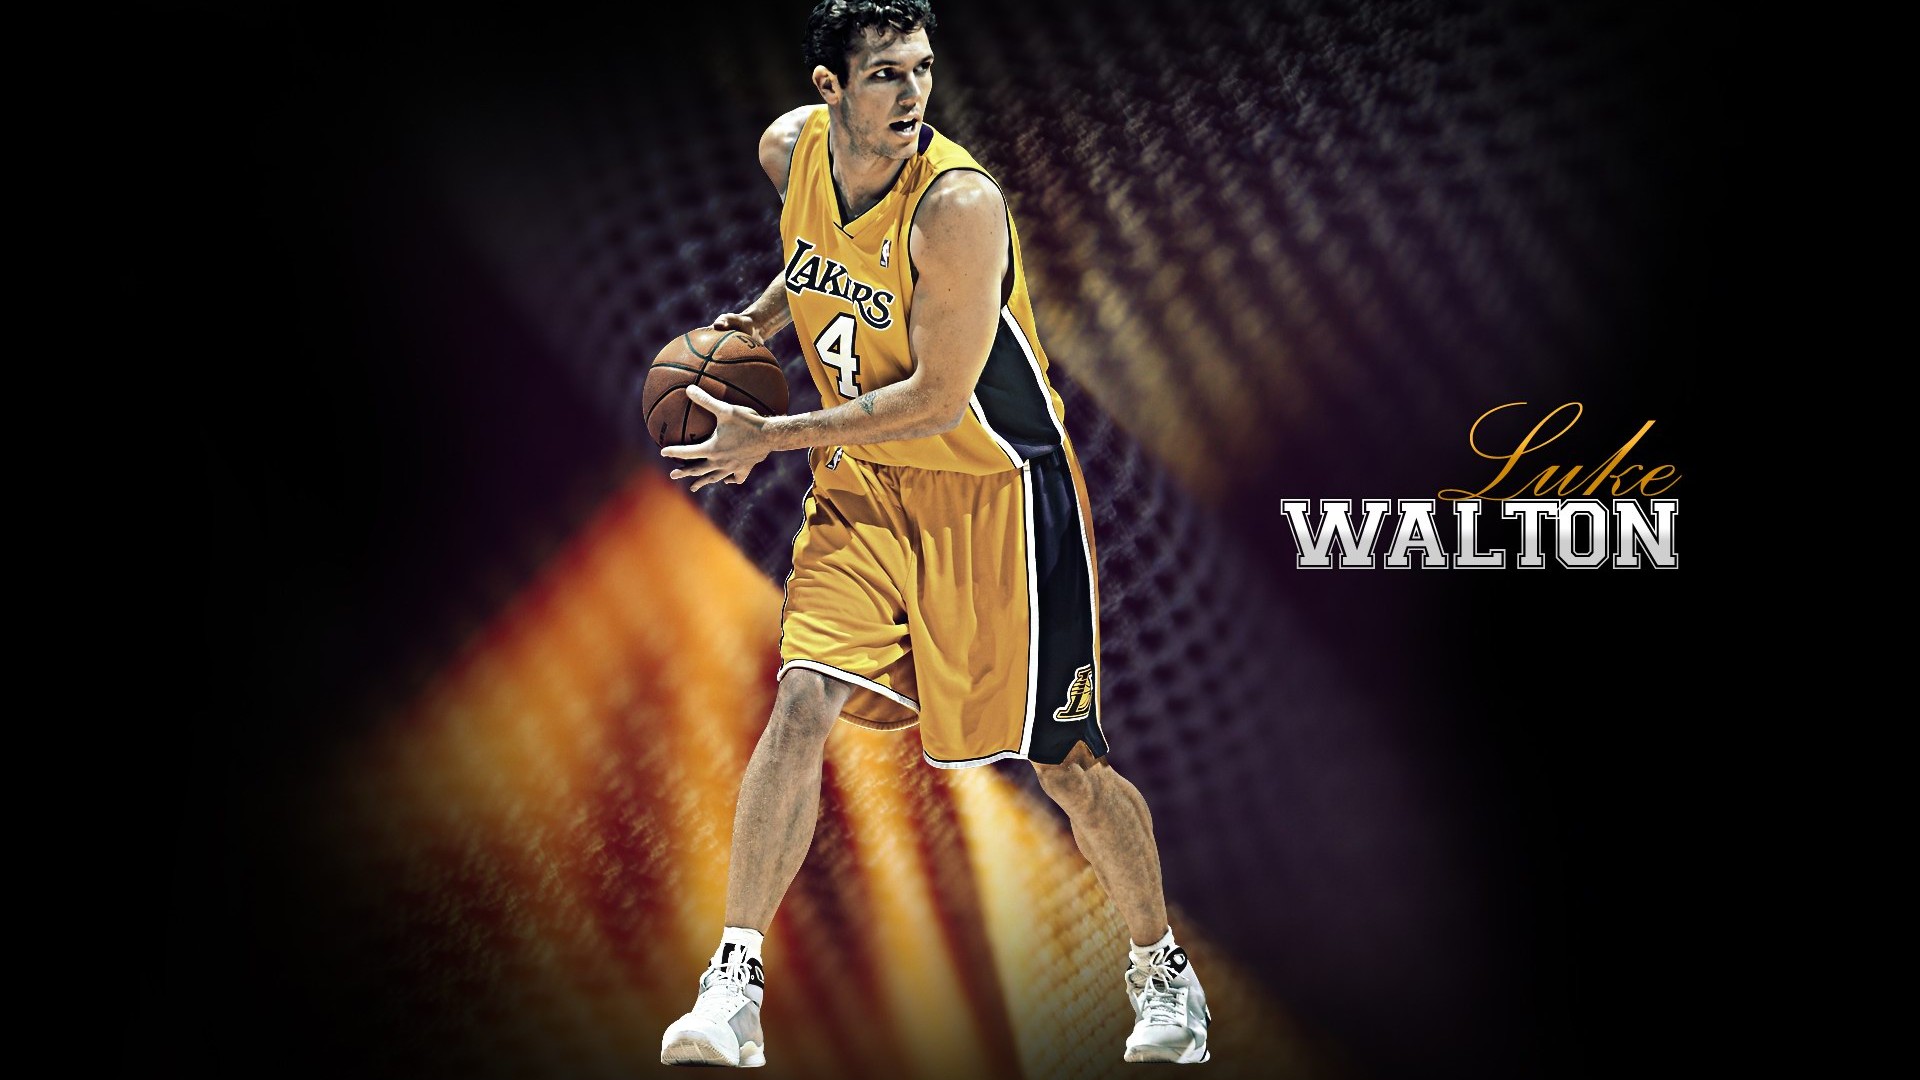 Los Angeles Lakers Wallpaper Oficial #18 - 1920x1080